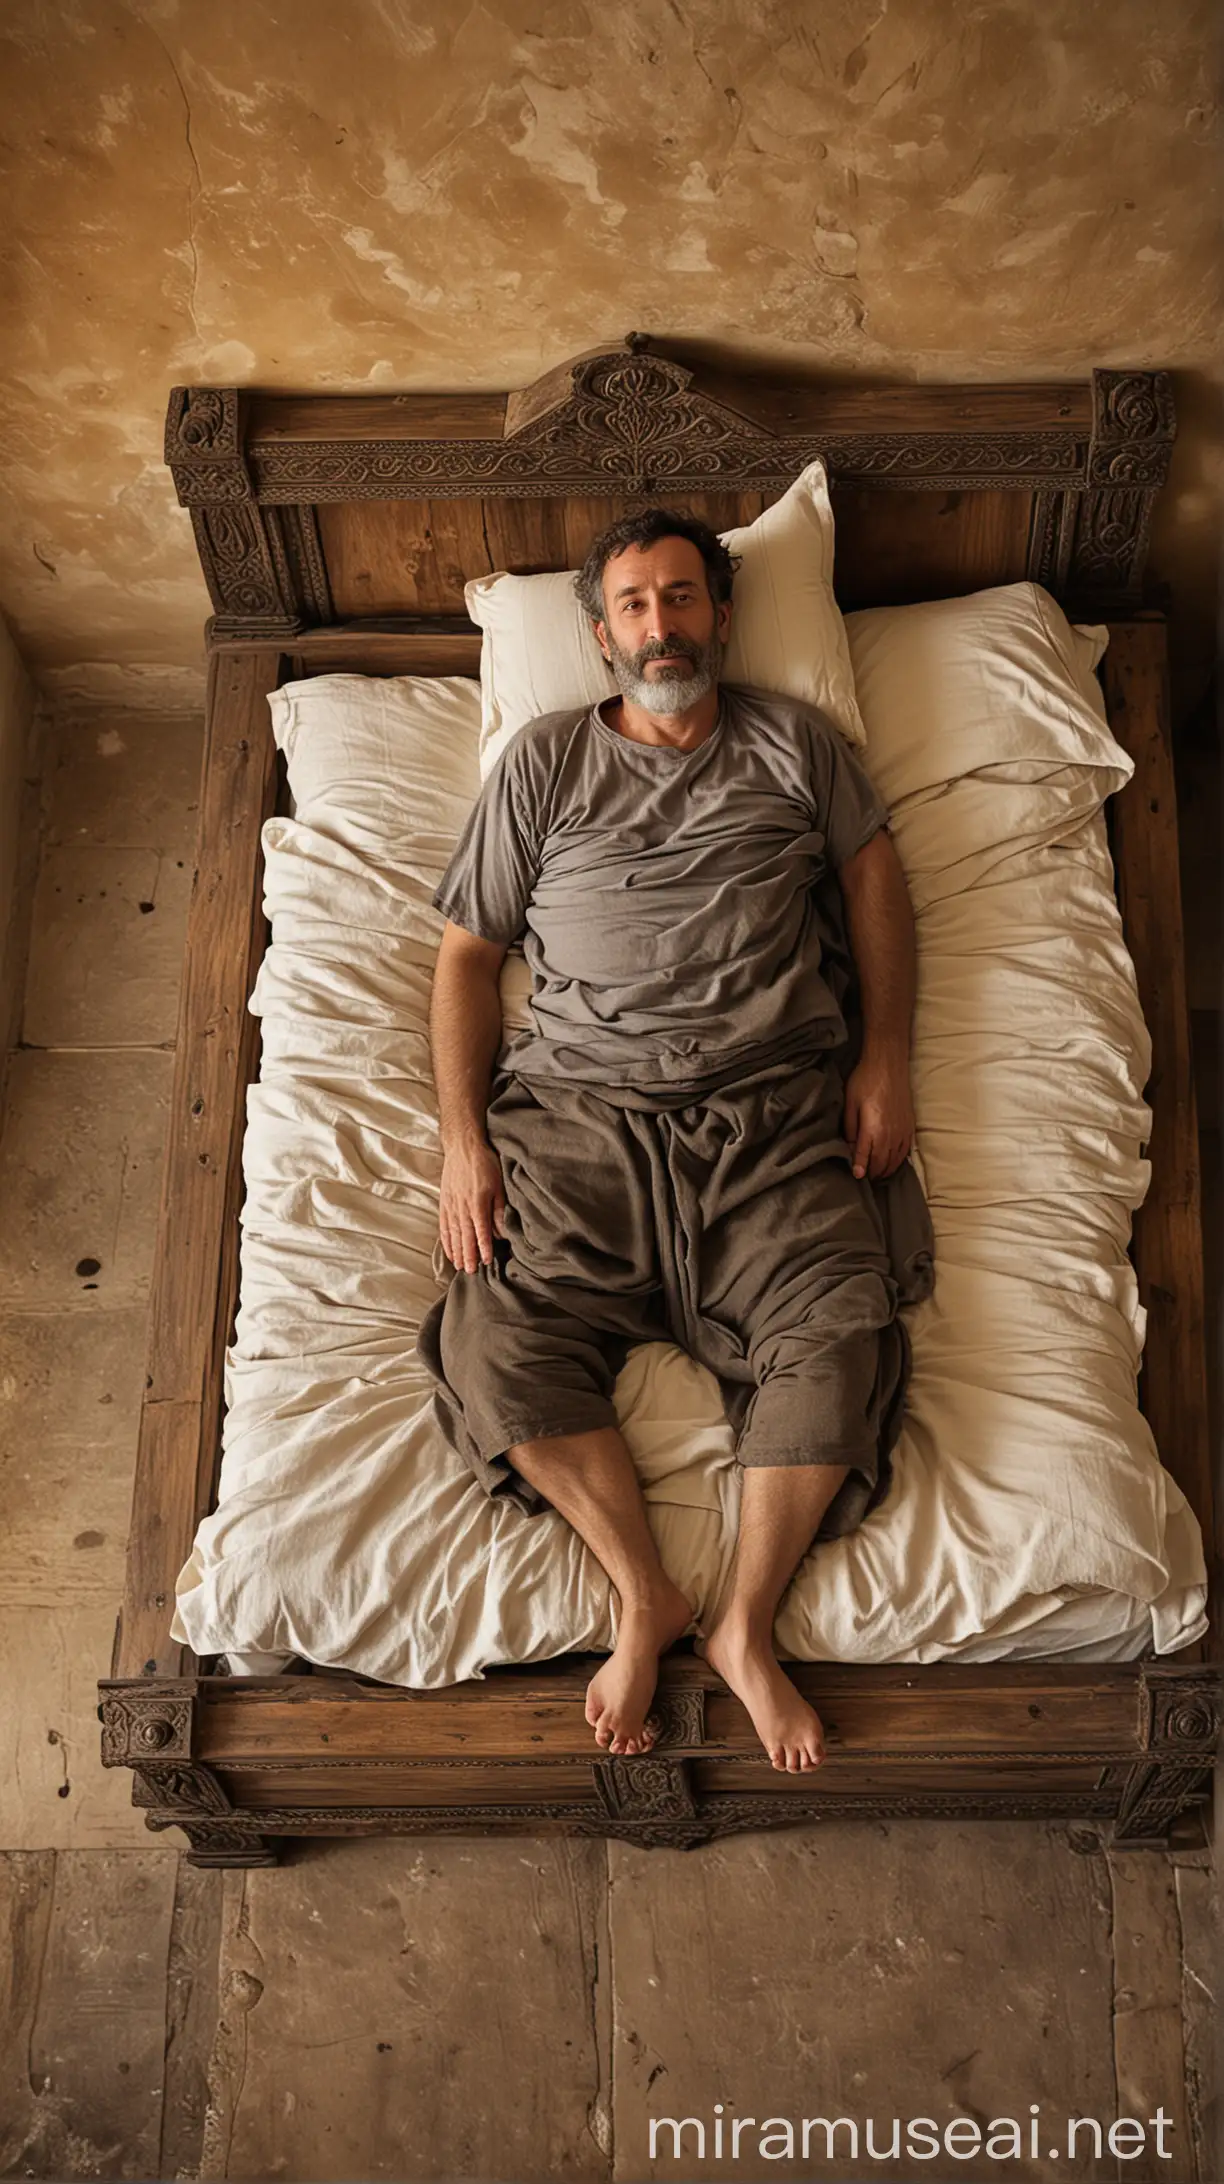 Elderly Jewish Man Resting on Antique Bed in Ancient Setting